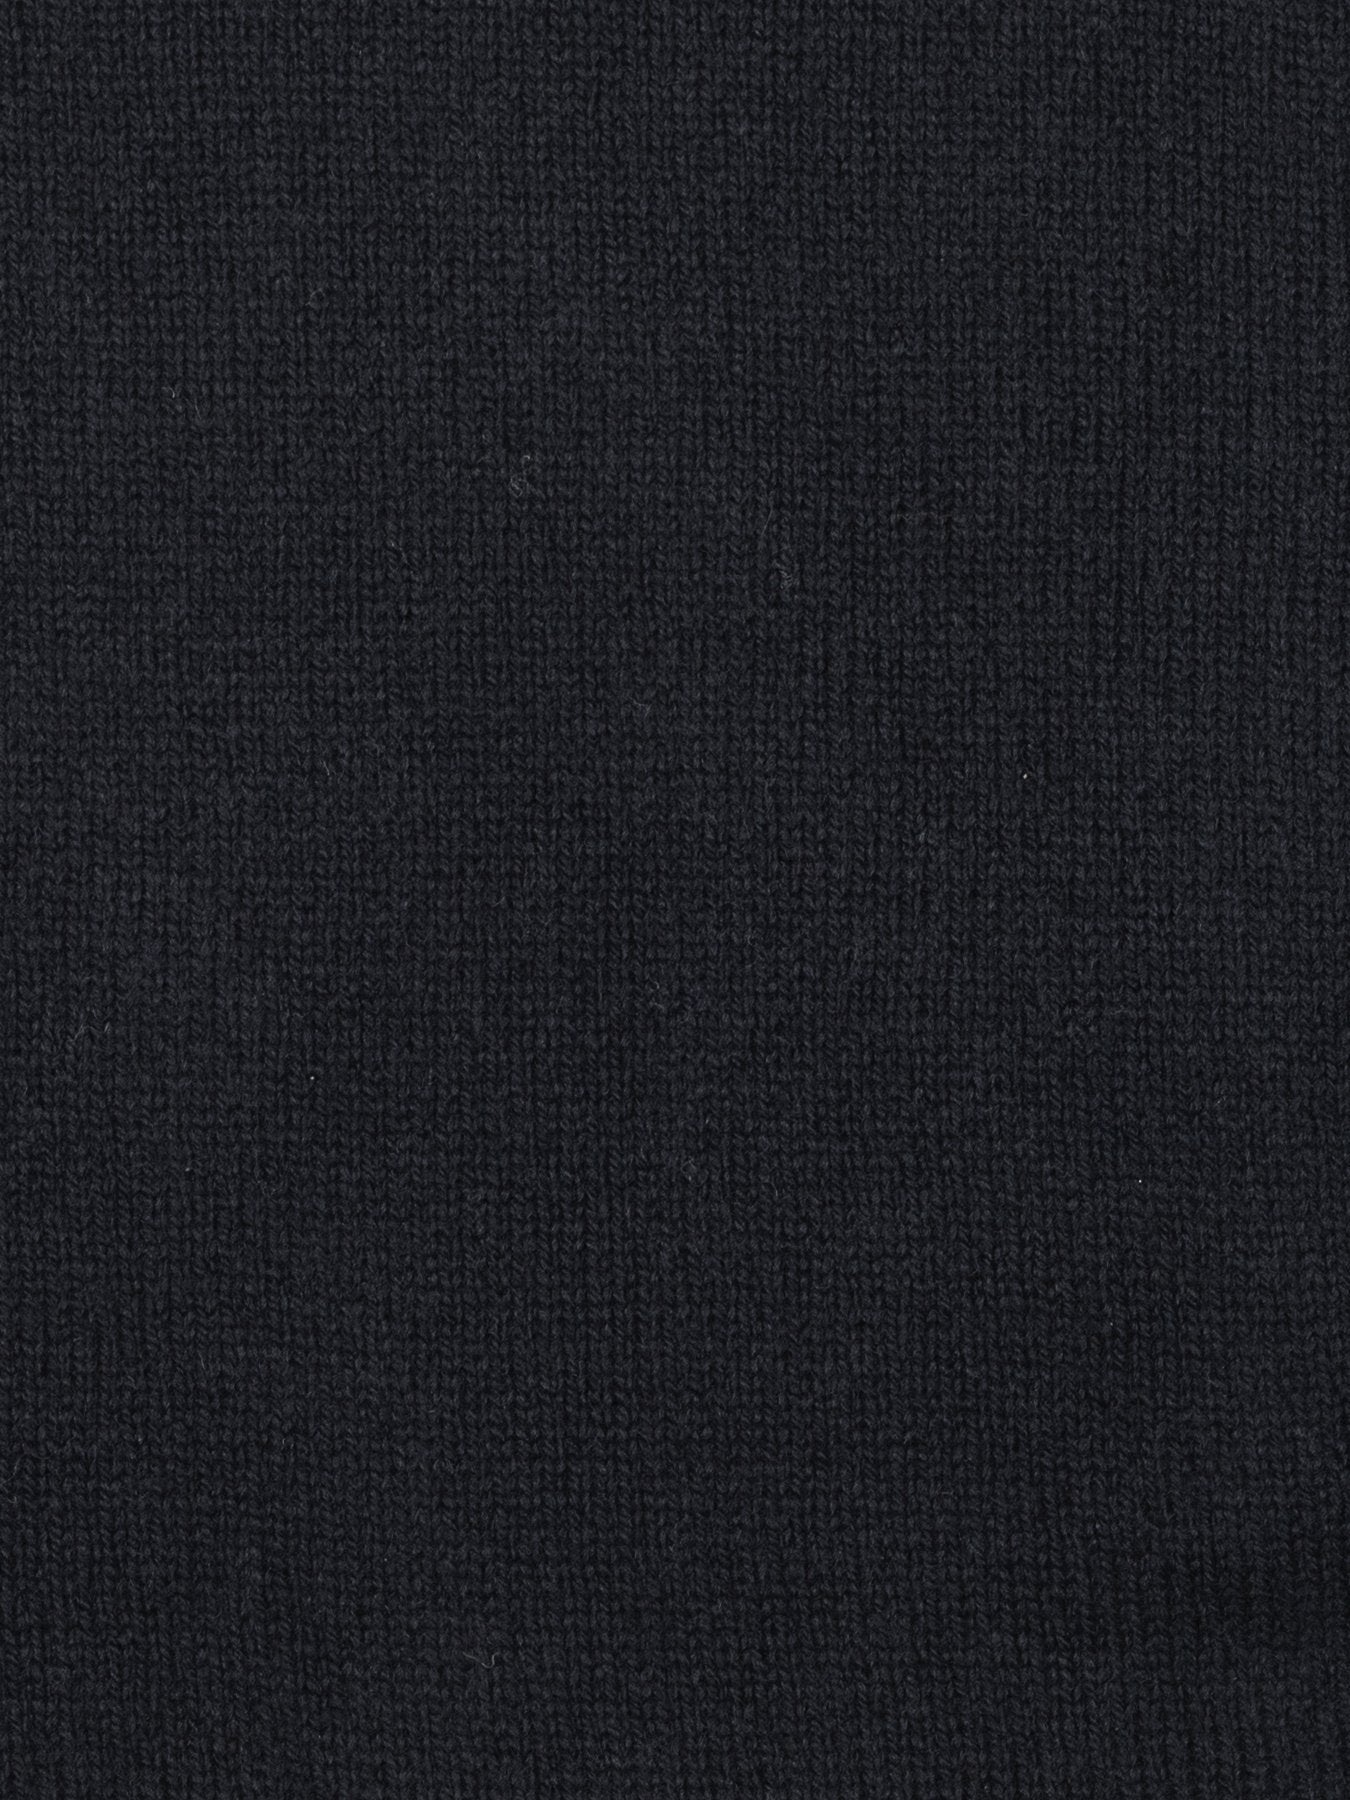 a swatch of plain single jersey knitting made from fine merino wool in a dark navy colour